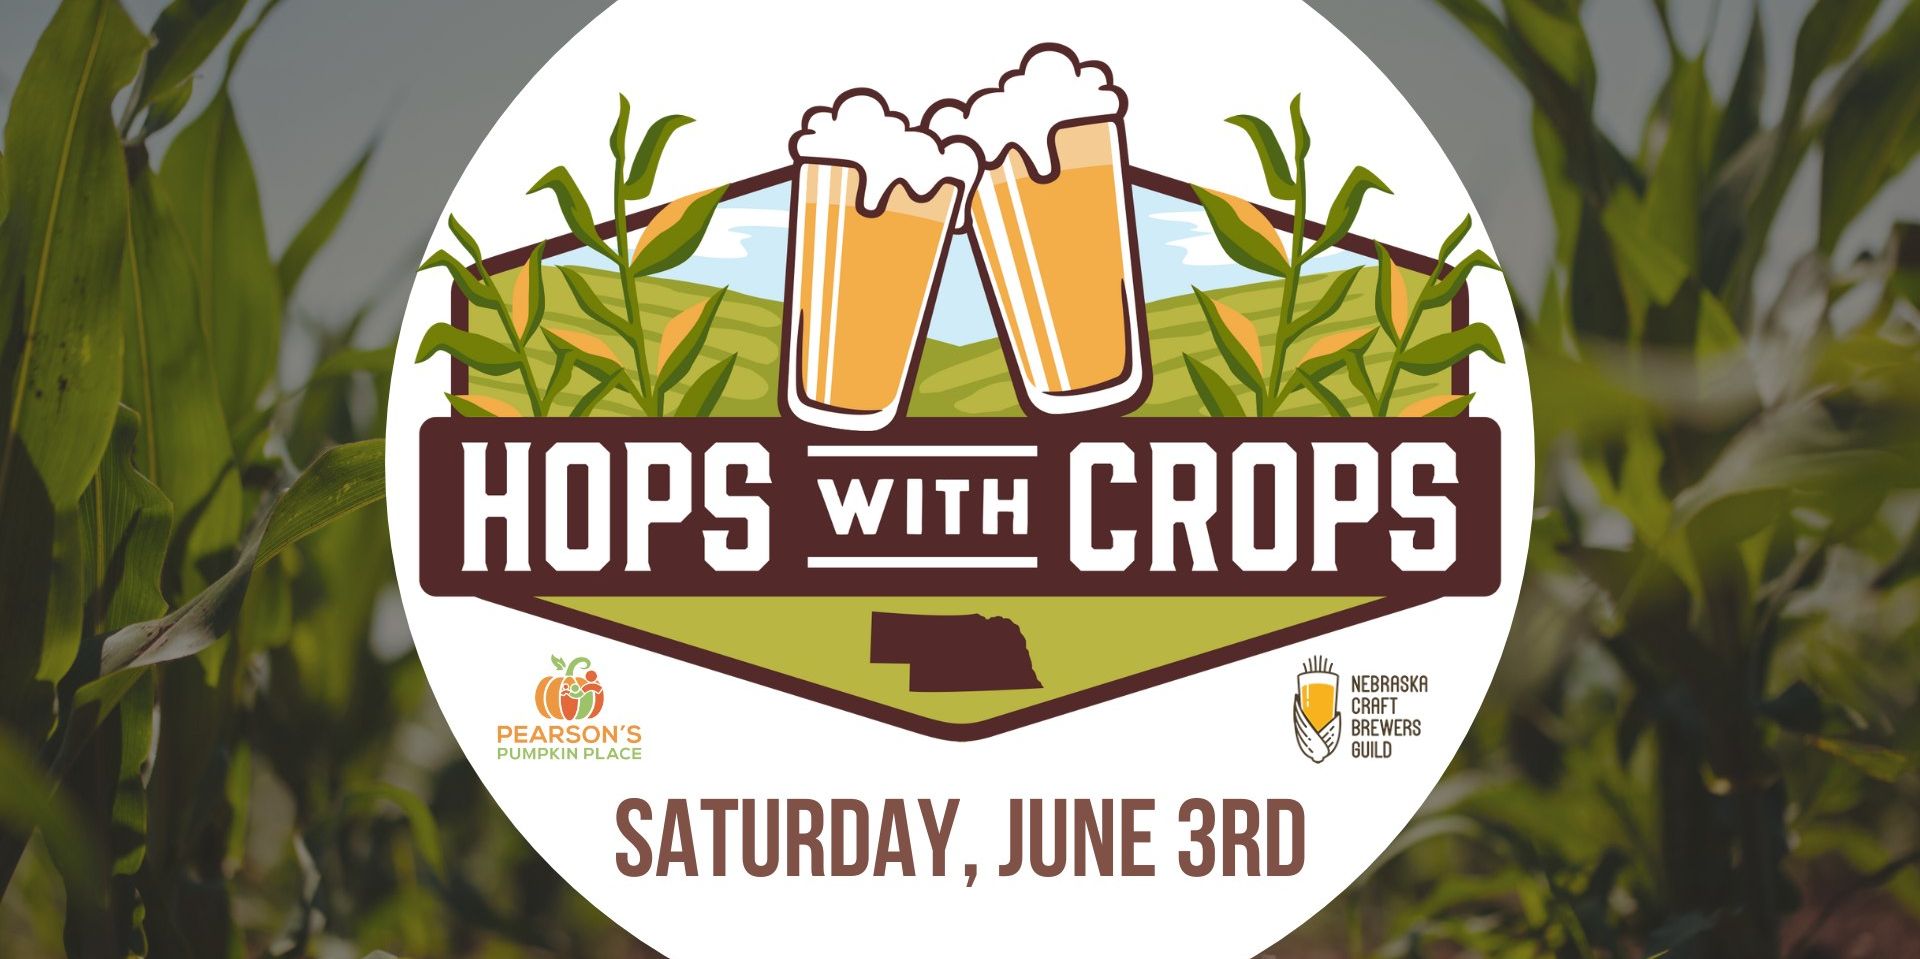 Hops with Crops promotional image